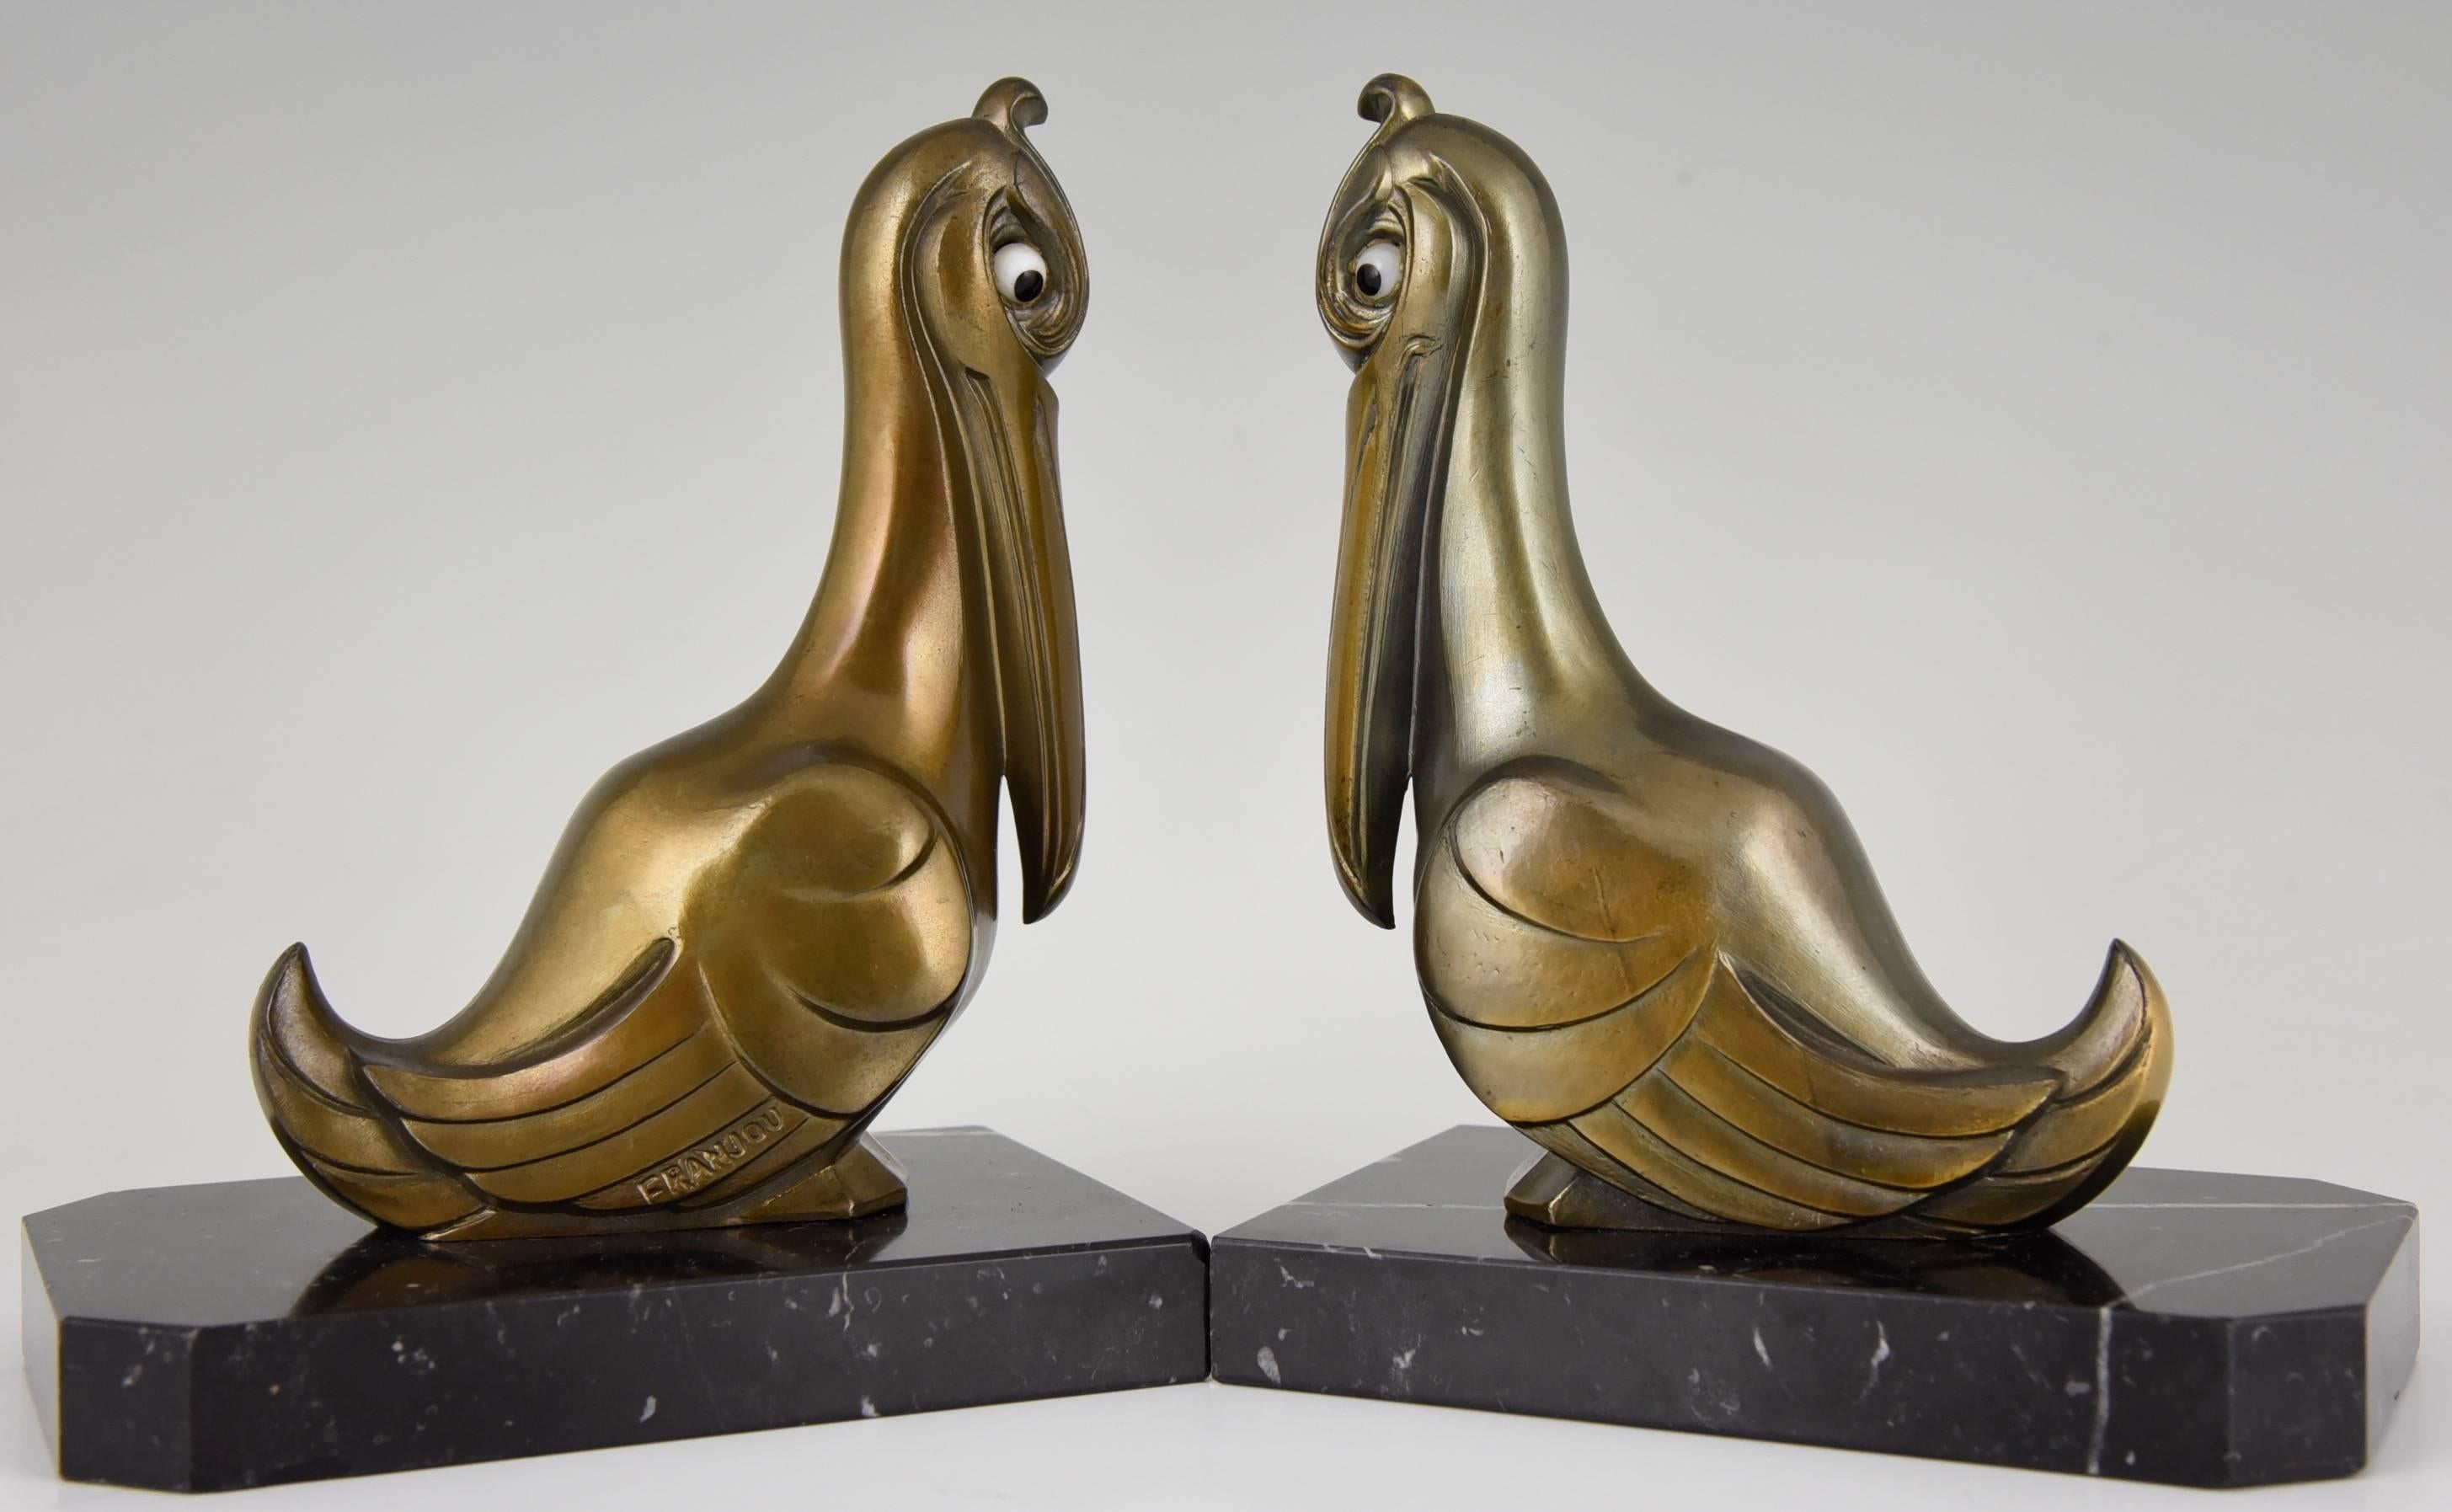 Description: Pelican bookends.
Artist/ Maker: Franjou. 
Signature/ Marks:  Franjou. 
Style: Art Deco
Date: circa 1930.
Material: Patinated white metal.  Marble base.
Origin: France. 
Condition:  Very good condition.  
Size of one: 
H 5.9